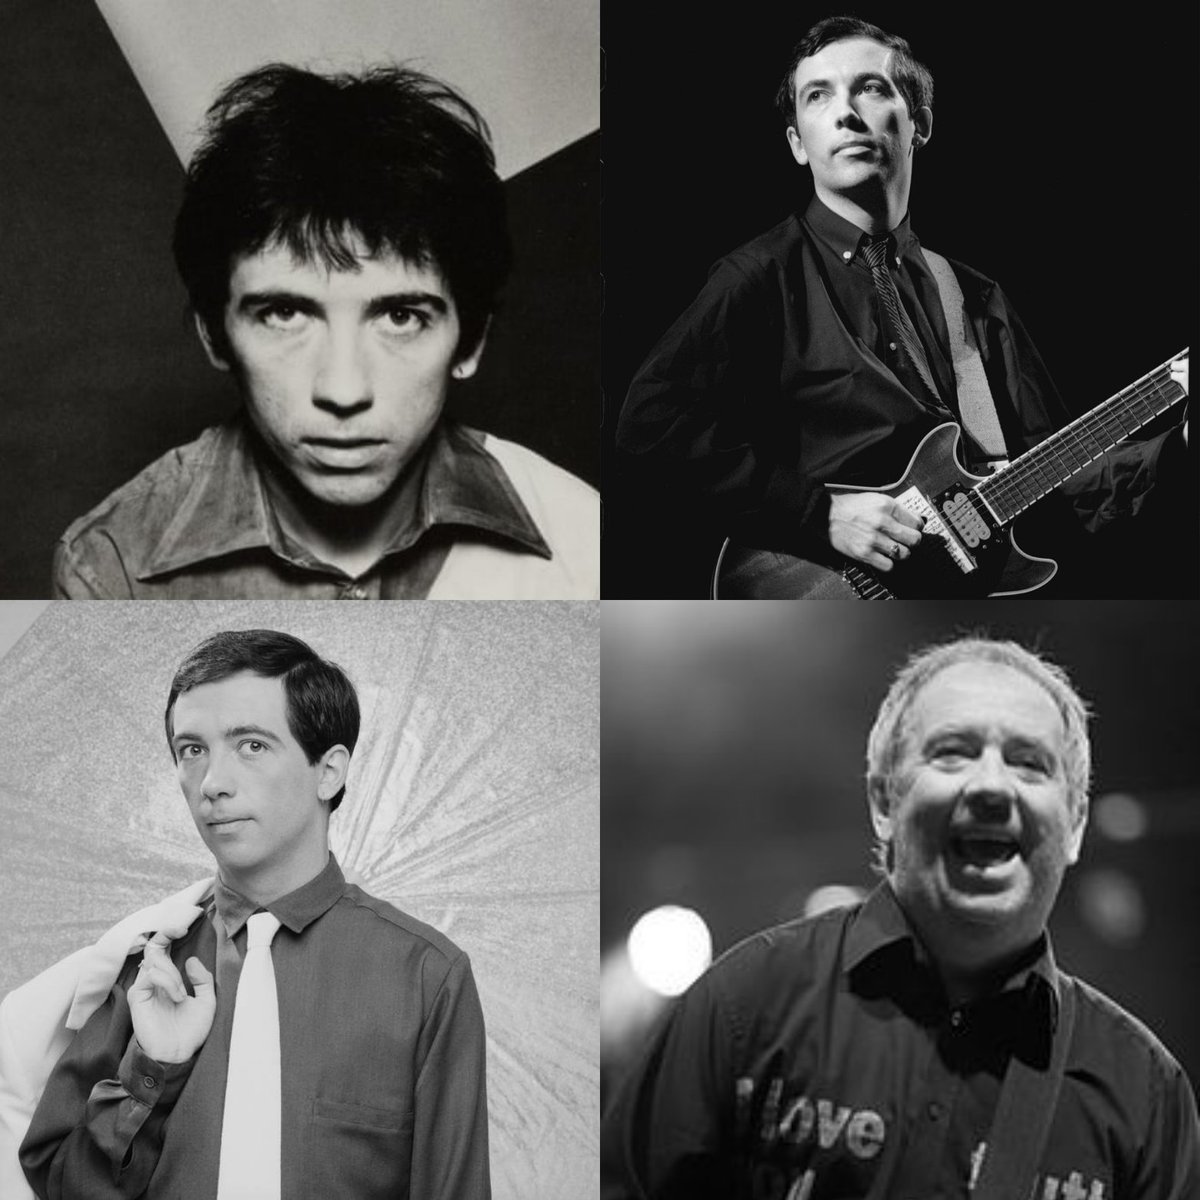 Remembering the 
late great #PeteShelley
born on this day in 1955.
What are your favourite 
#Buzzcocks & solo tracks?